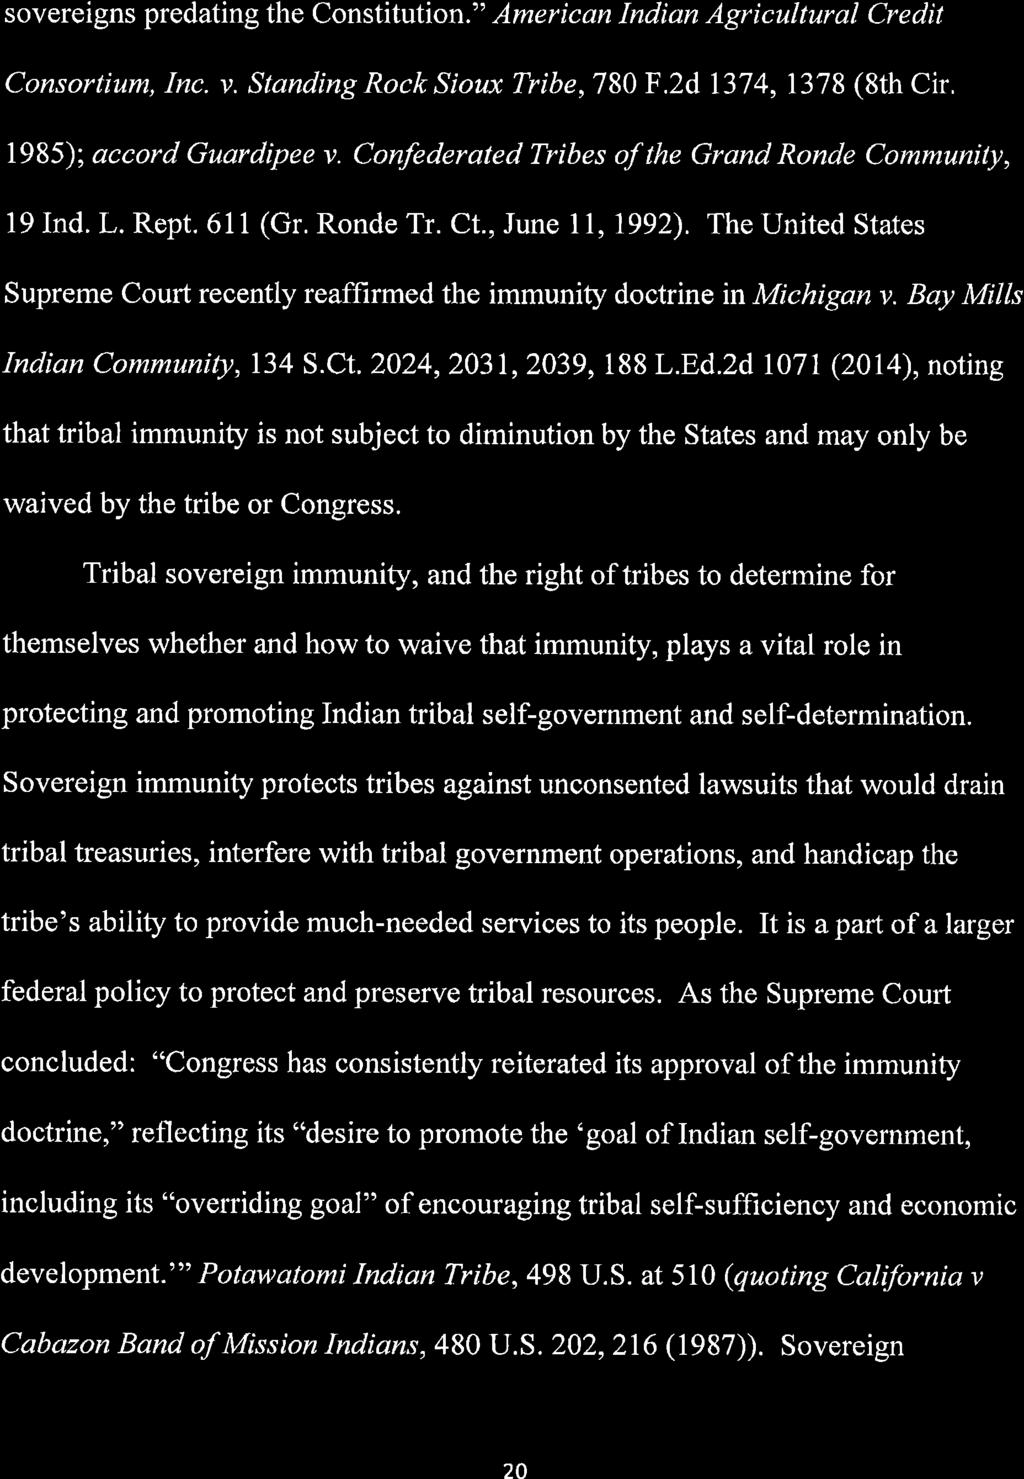 sovereigns predating the Constitution." American Indian Agricultural Credit Consortium, Inc. v. Standing Rock Sioux Tribe, 780 F.2d 1374, 1378 (8th Cir. 1985); accord Guardipee v.